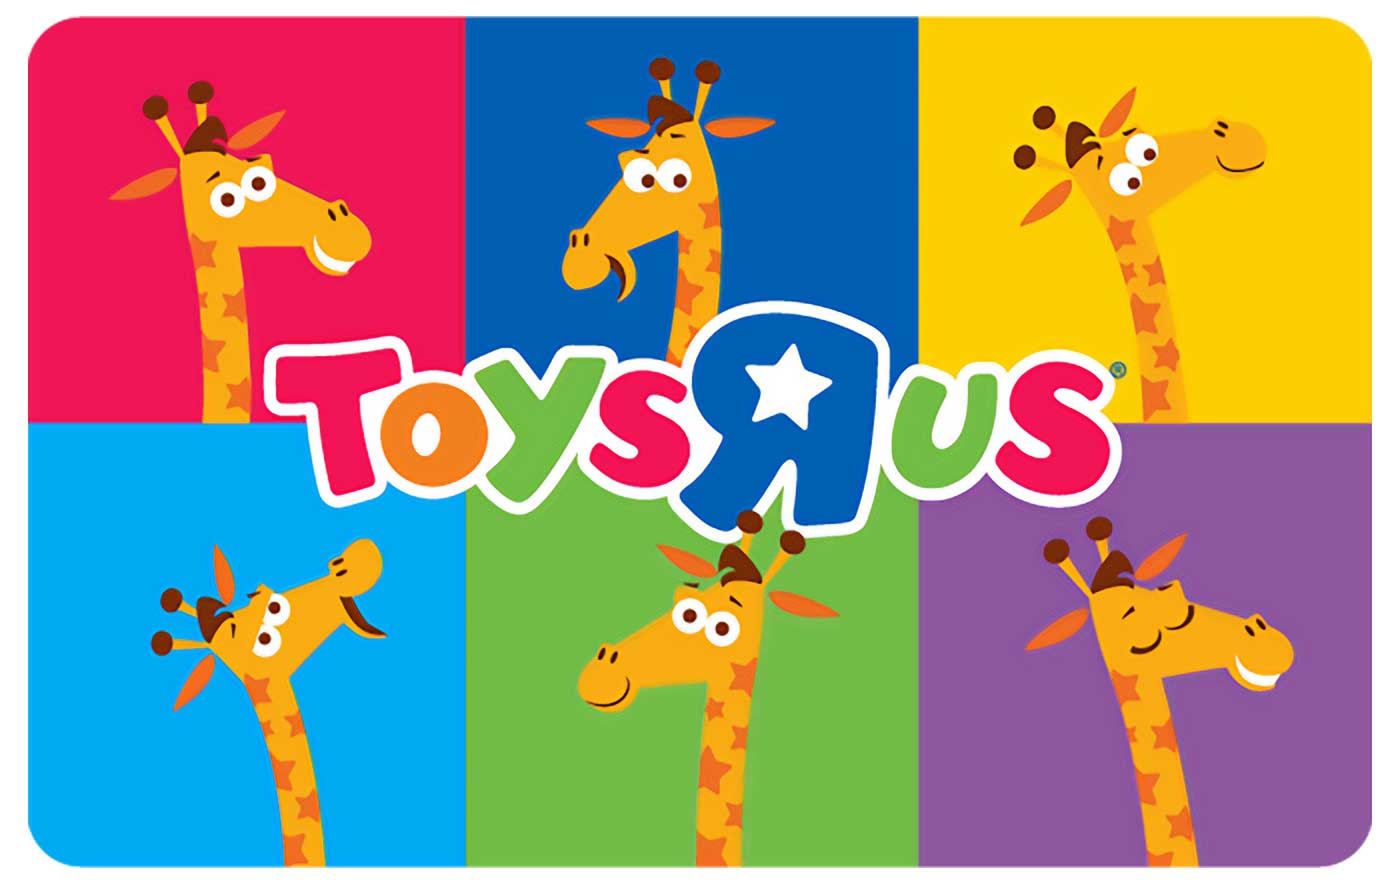 Toys r us - your chance to win a $200 toys "r" us gift card